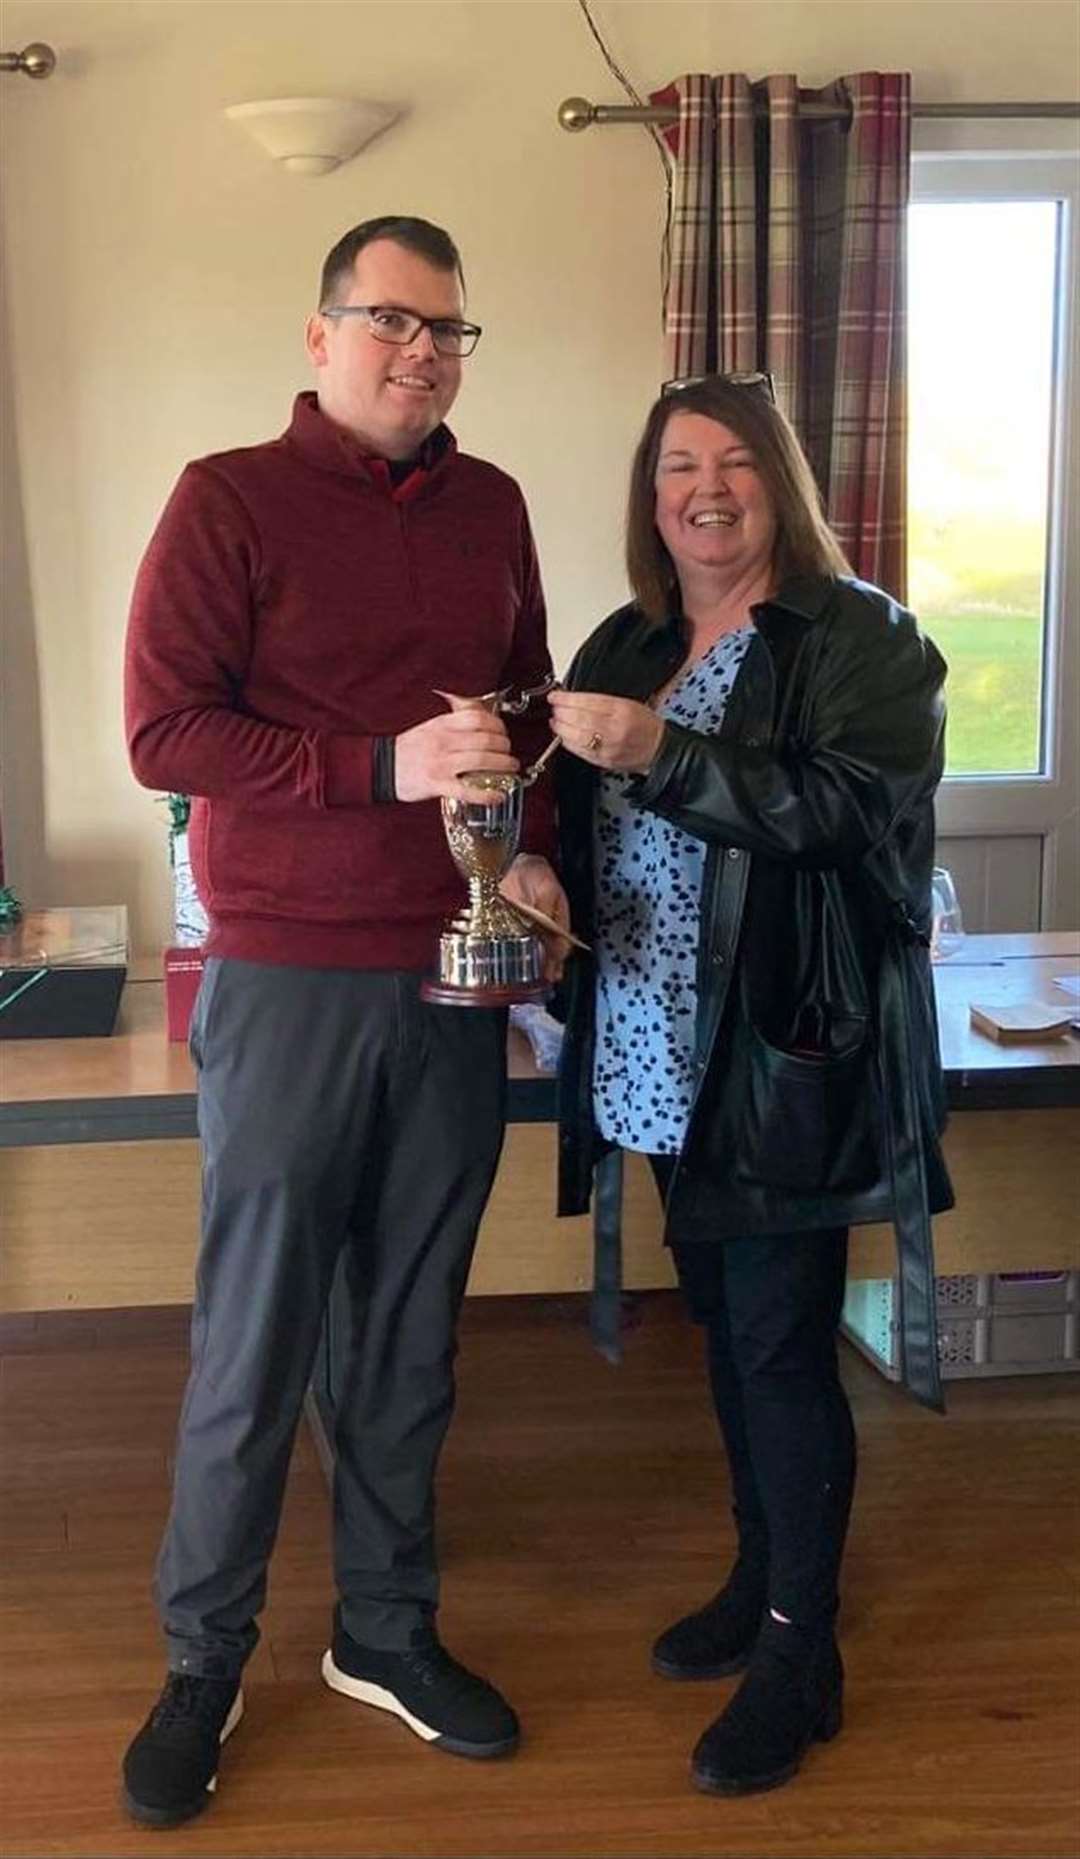 Ronnie Campbell Open winner Brent Munro receiving the trophy from Maryjane Campbell, wife of the late Ronnie Campbell.